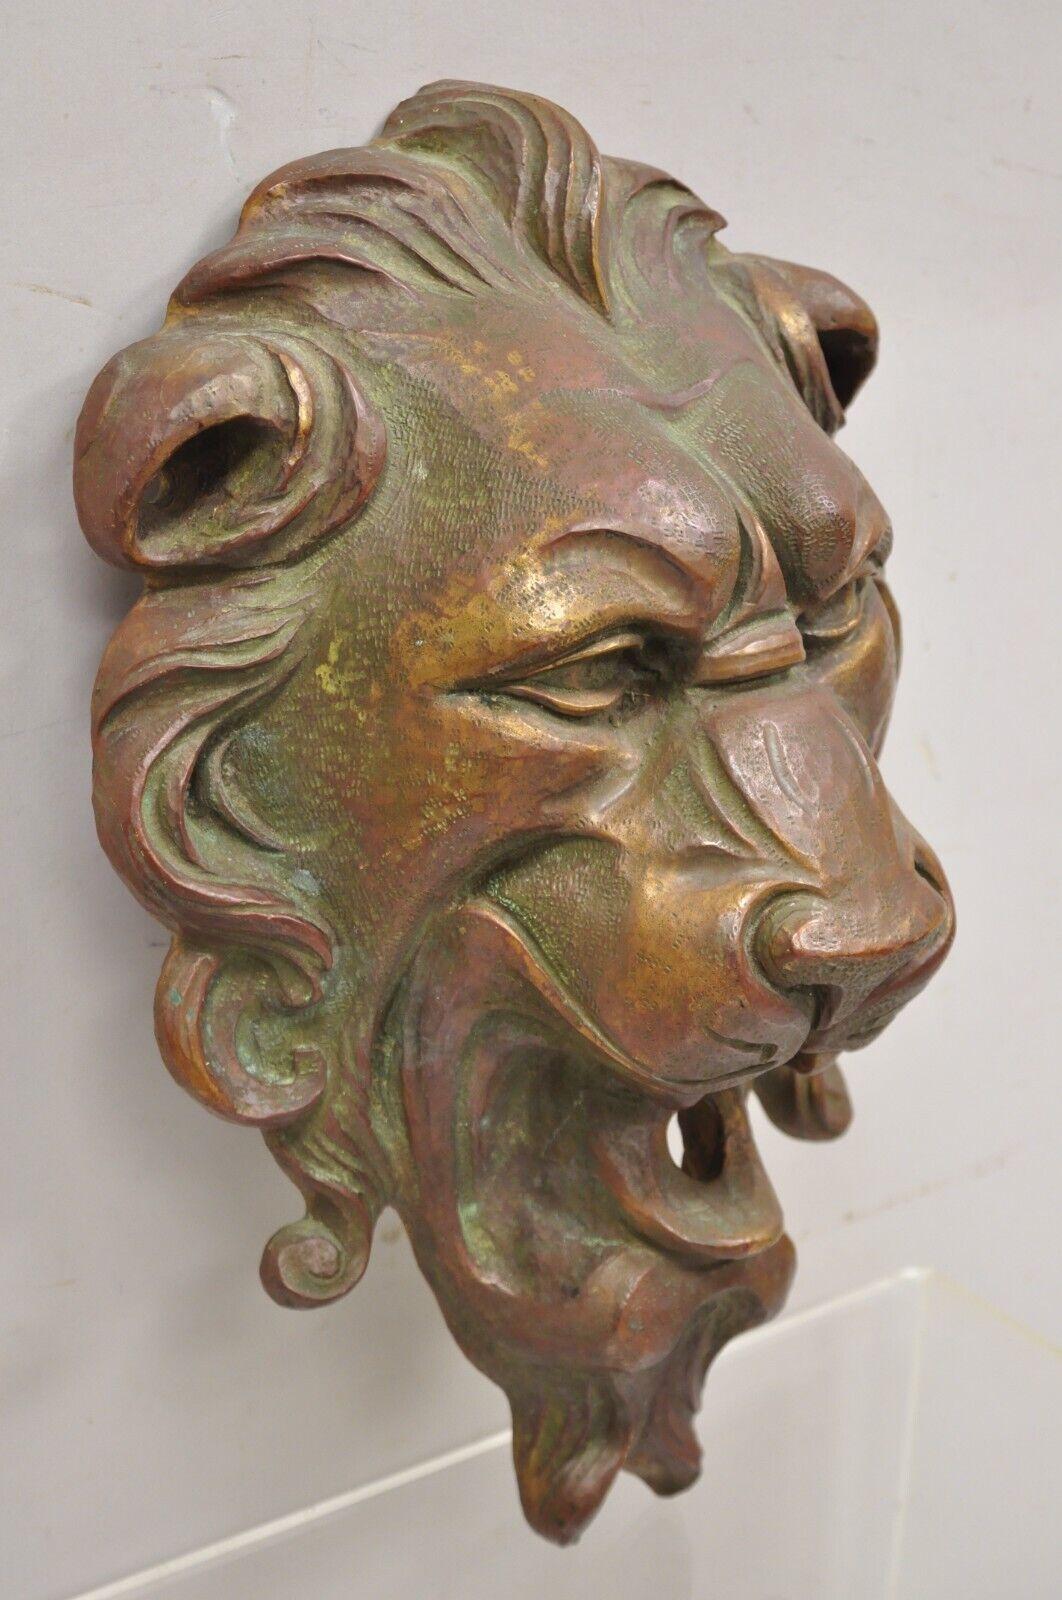 Antique Cast Bronze English Regency Lion Head Garden Wall Mounted Fountain Plate. Item features heavy cast bronze construction, remarkable detail, weights approx. 30 lbs. Does not include hose or pump. Circa Early 20th Century. Measurements: 16.5